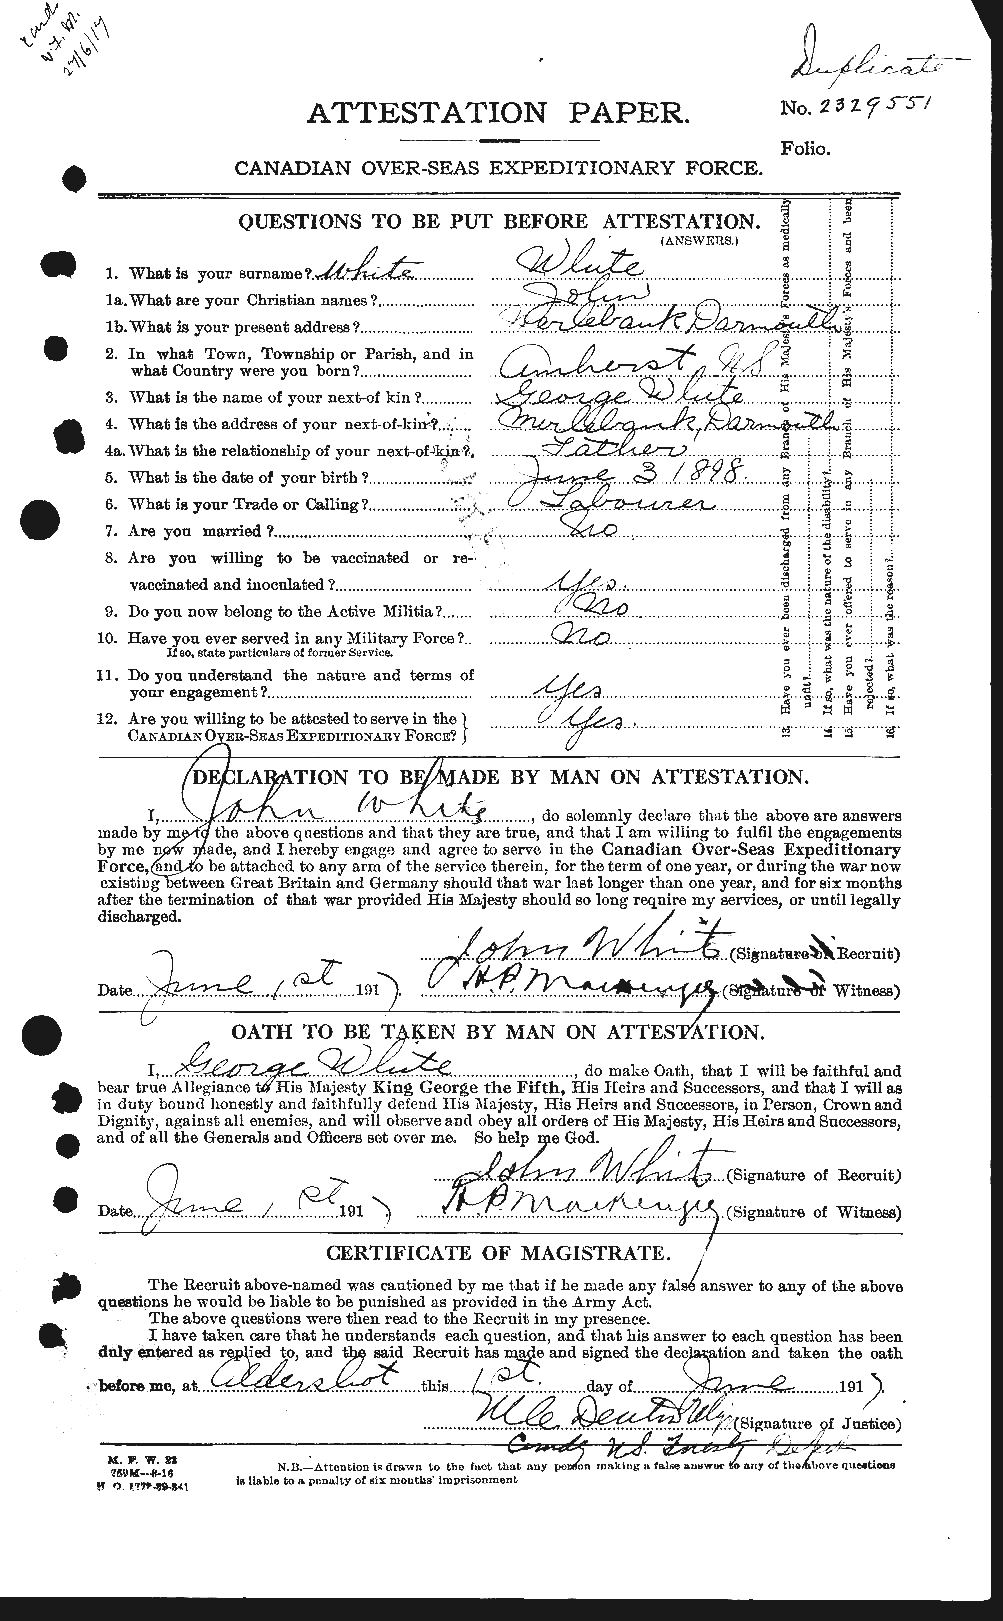 Personnel Records of the First World War - CEF 671487a